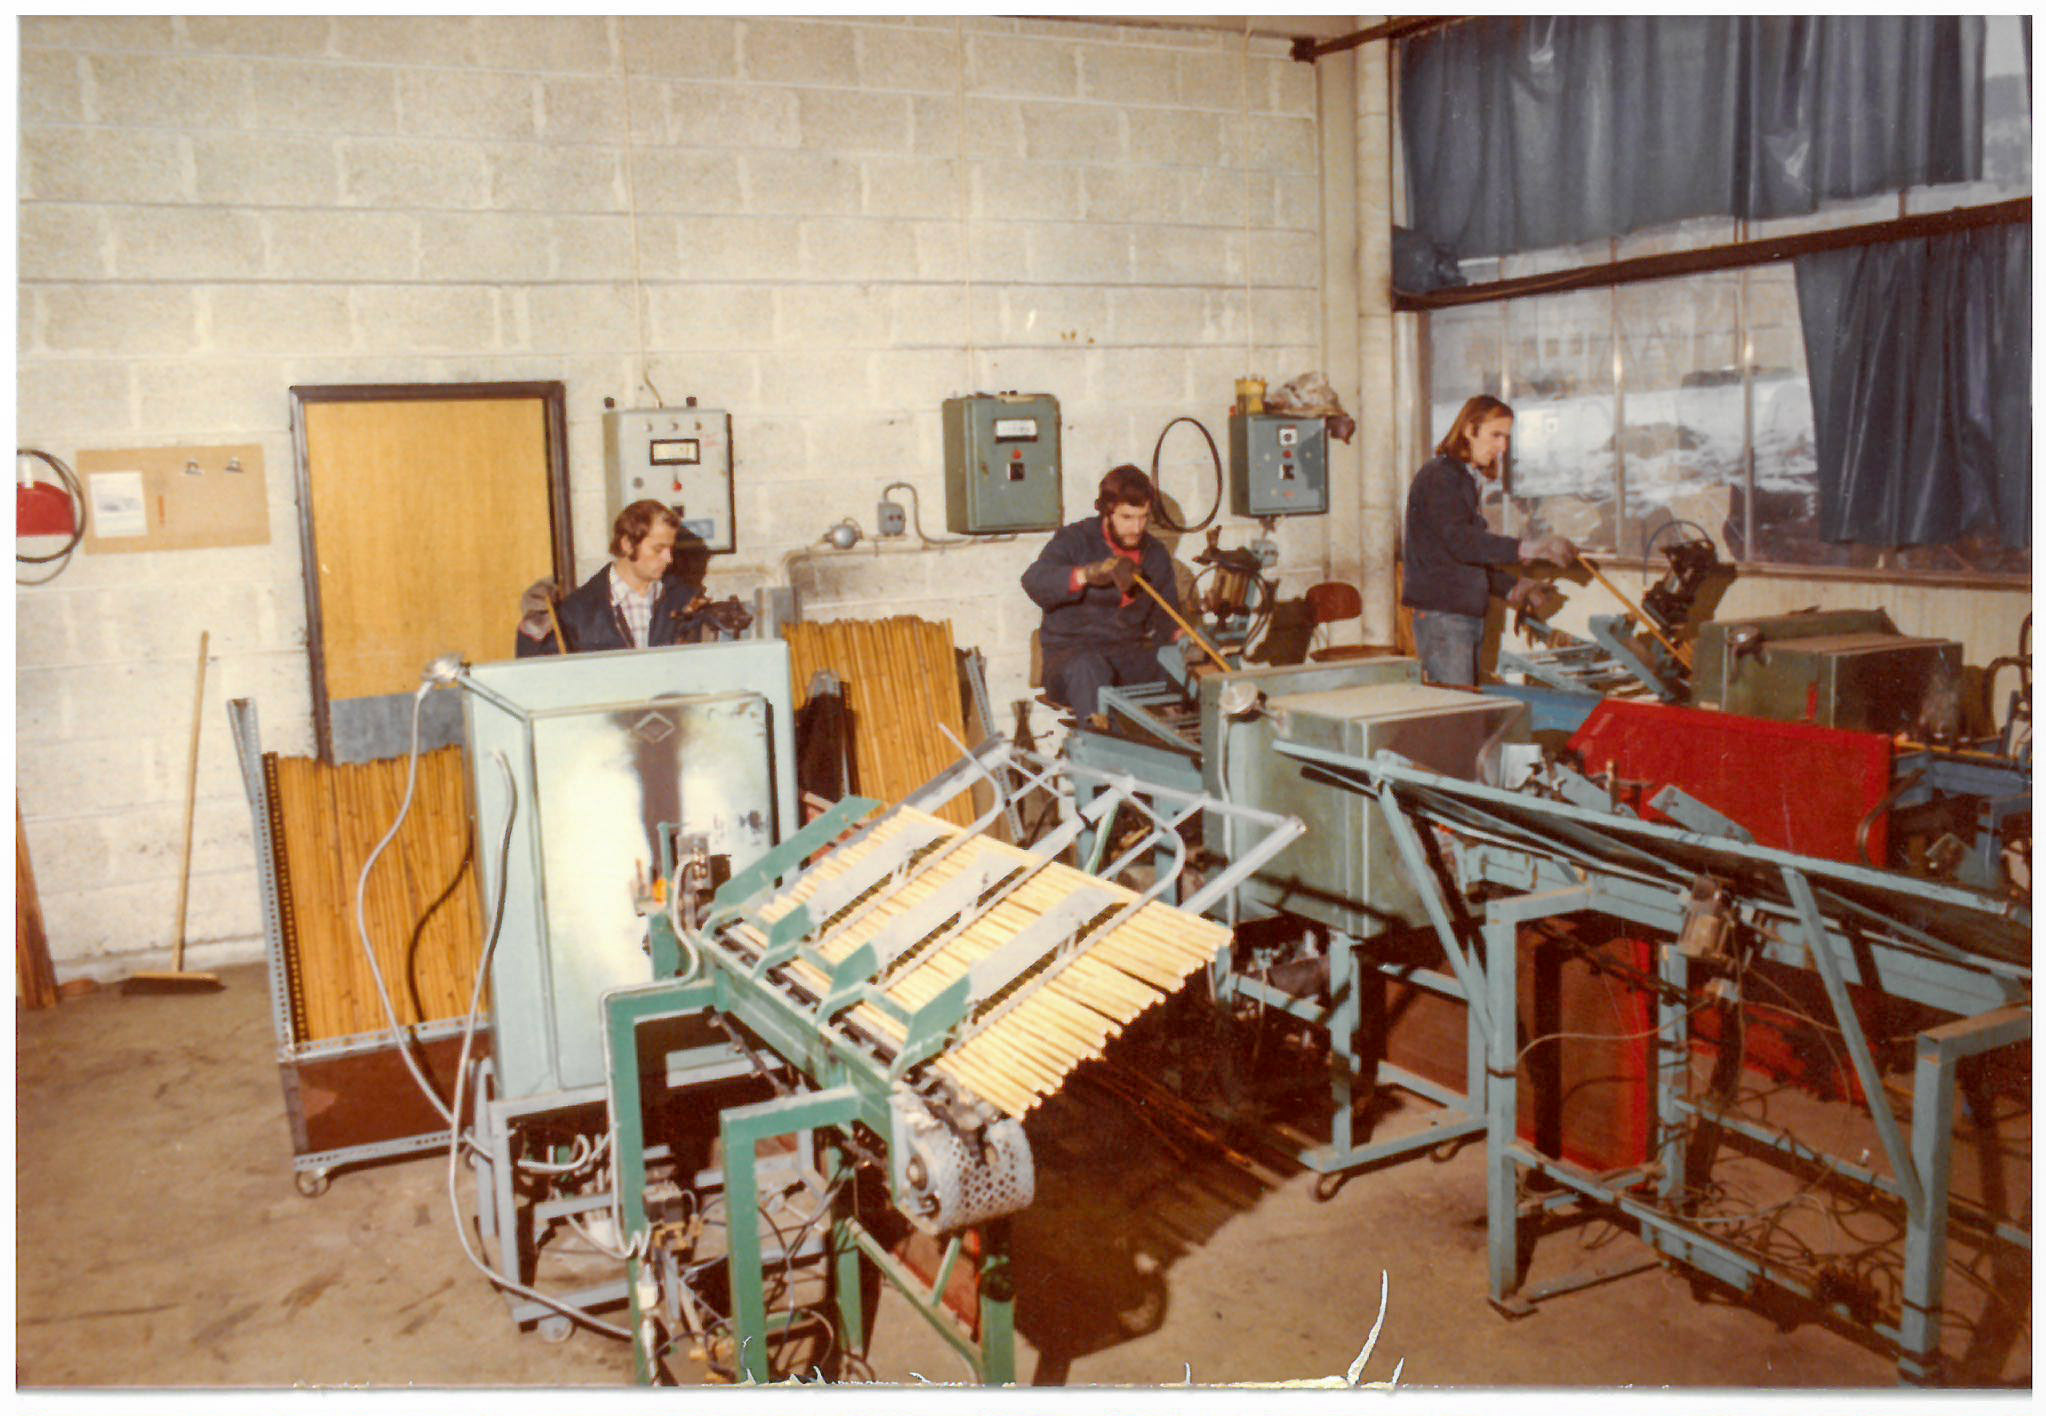 Bamboo ski pole production at the Swix/Liljedahl's pole factory in Lillehammer, 1976. The following year, 900,000 pairs of ski poles were made from Tonkin bamboo. Here you can see how the bamboo was fed into the ovens from the back.